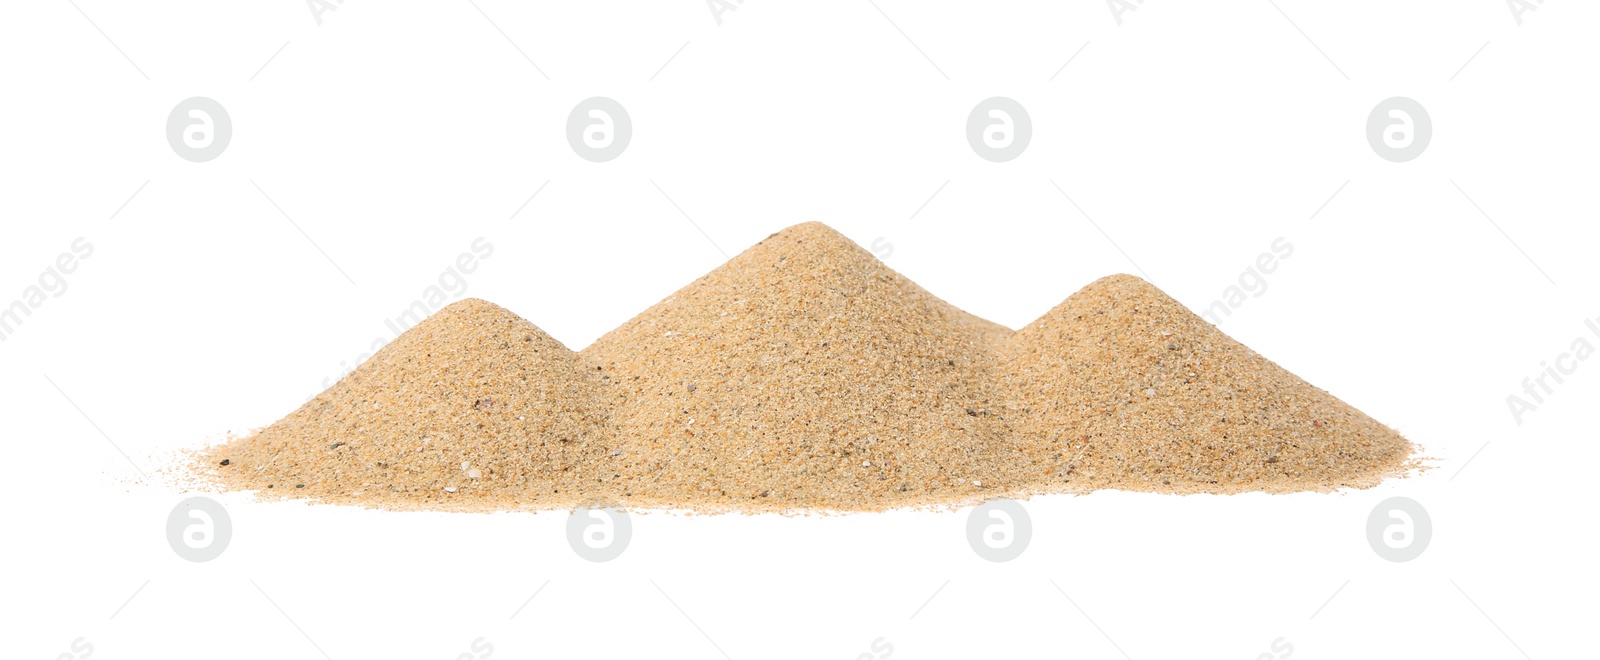 Photo of Heaps of beach sand isolated on white